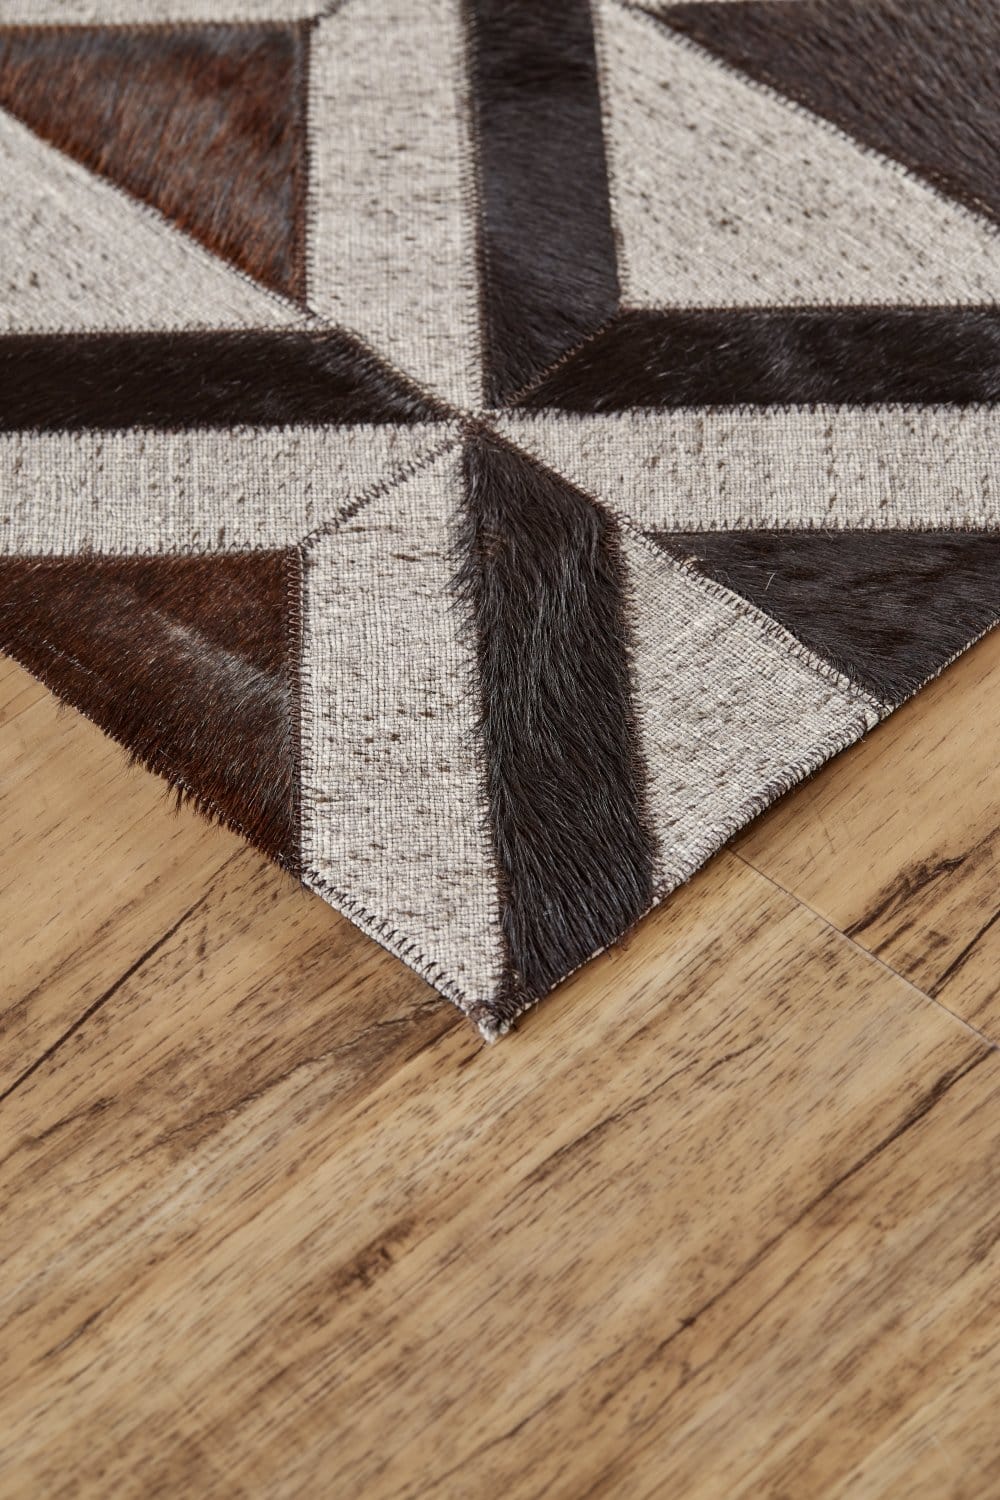 Feizy Fannin Handmade Diamond Leather Rug - Gray & Brown - Available in 4 Sizes